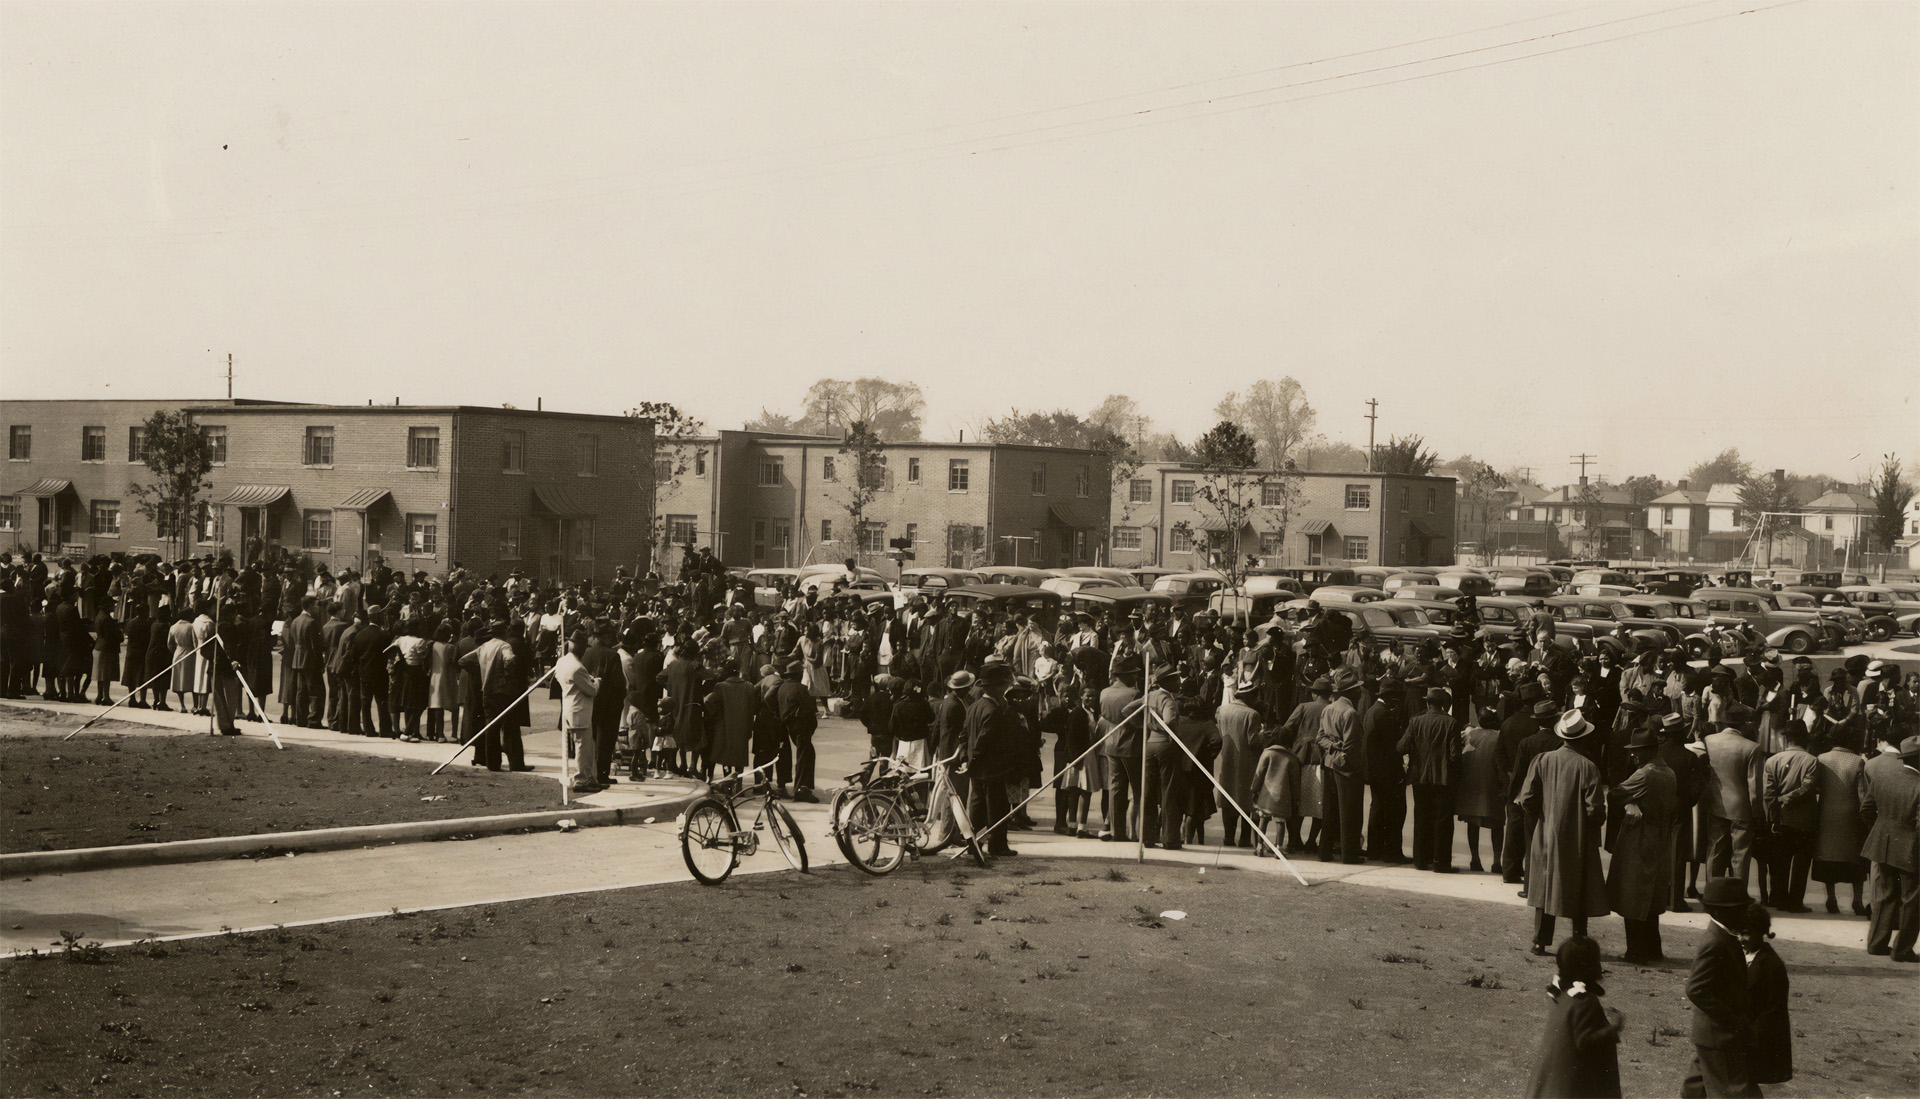 Poindexter Village, a crowd gathers to see the finished product and if it indeed had the amenities promised in its promotion.